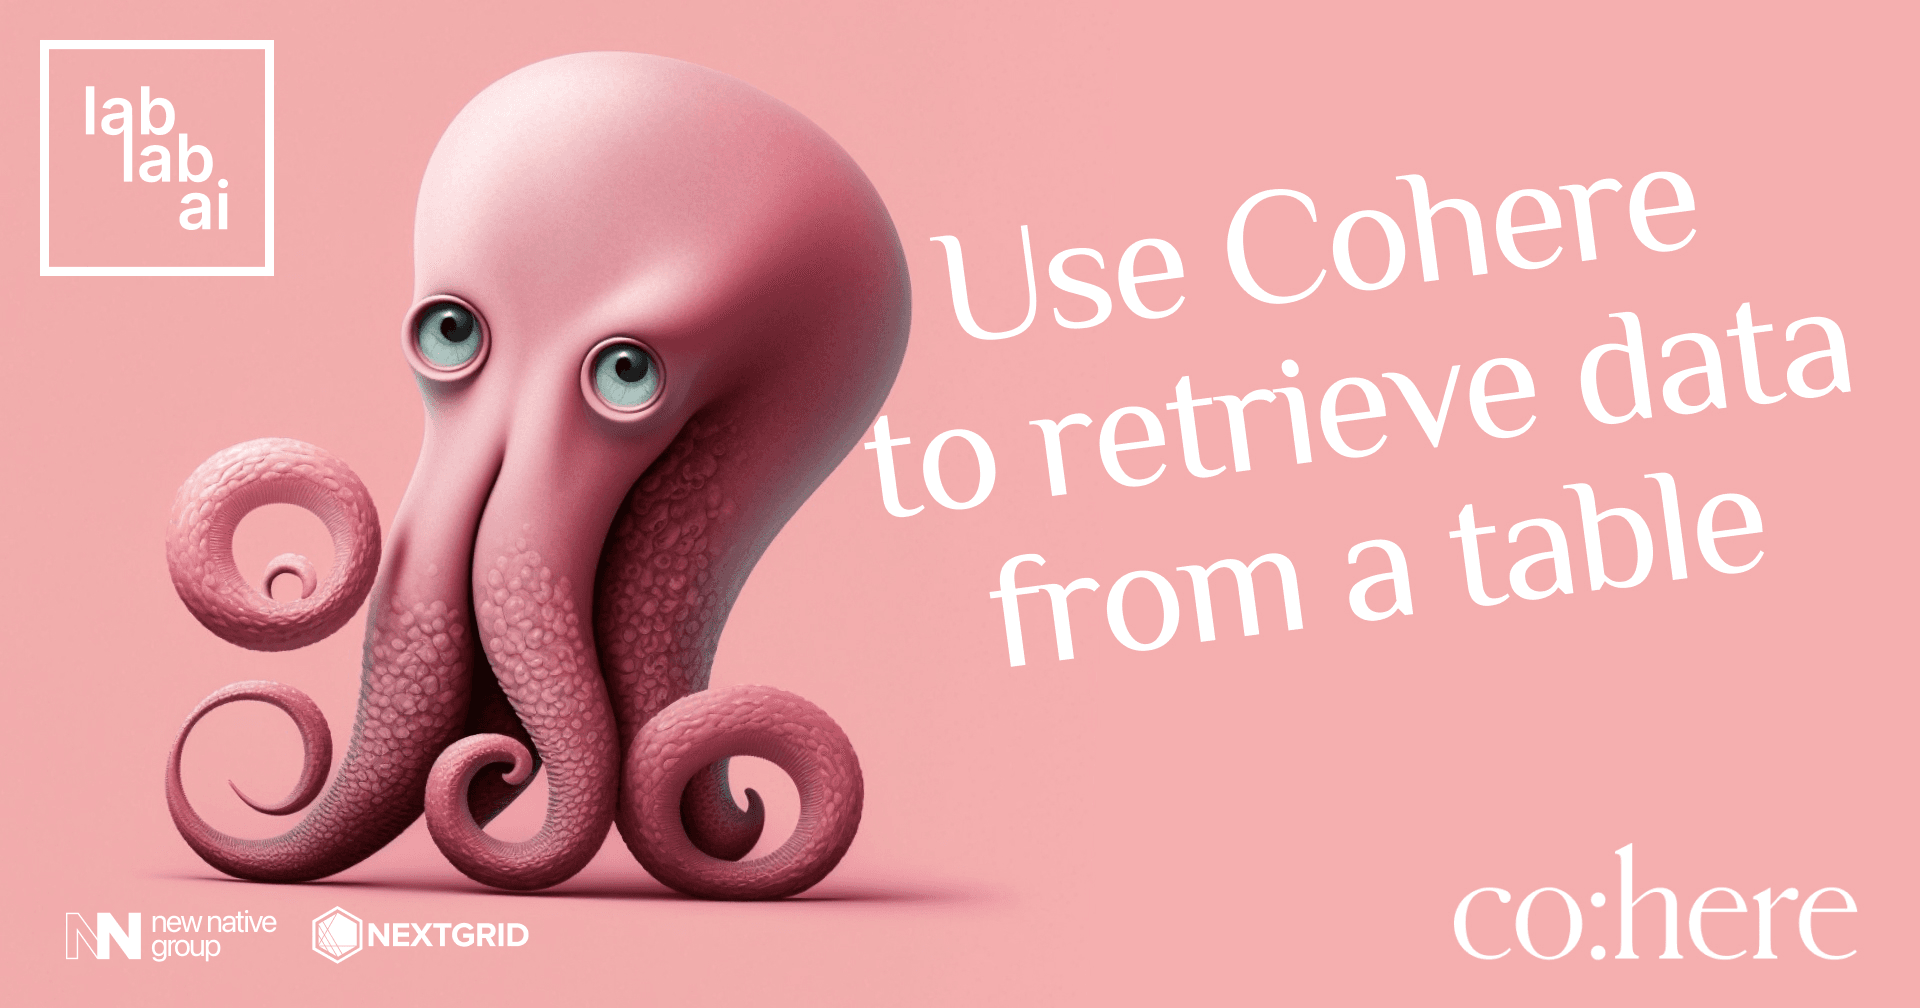 Cohere tutorial: How to use Cohere to retrieve data from a table